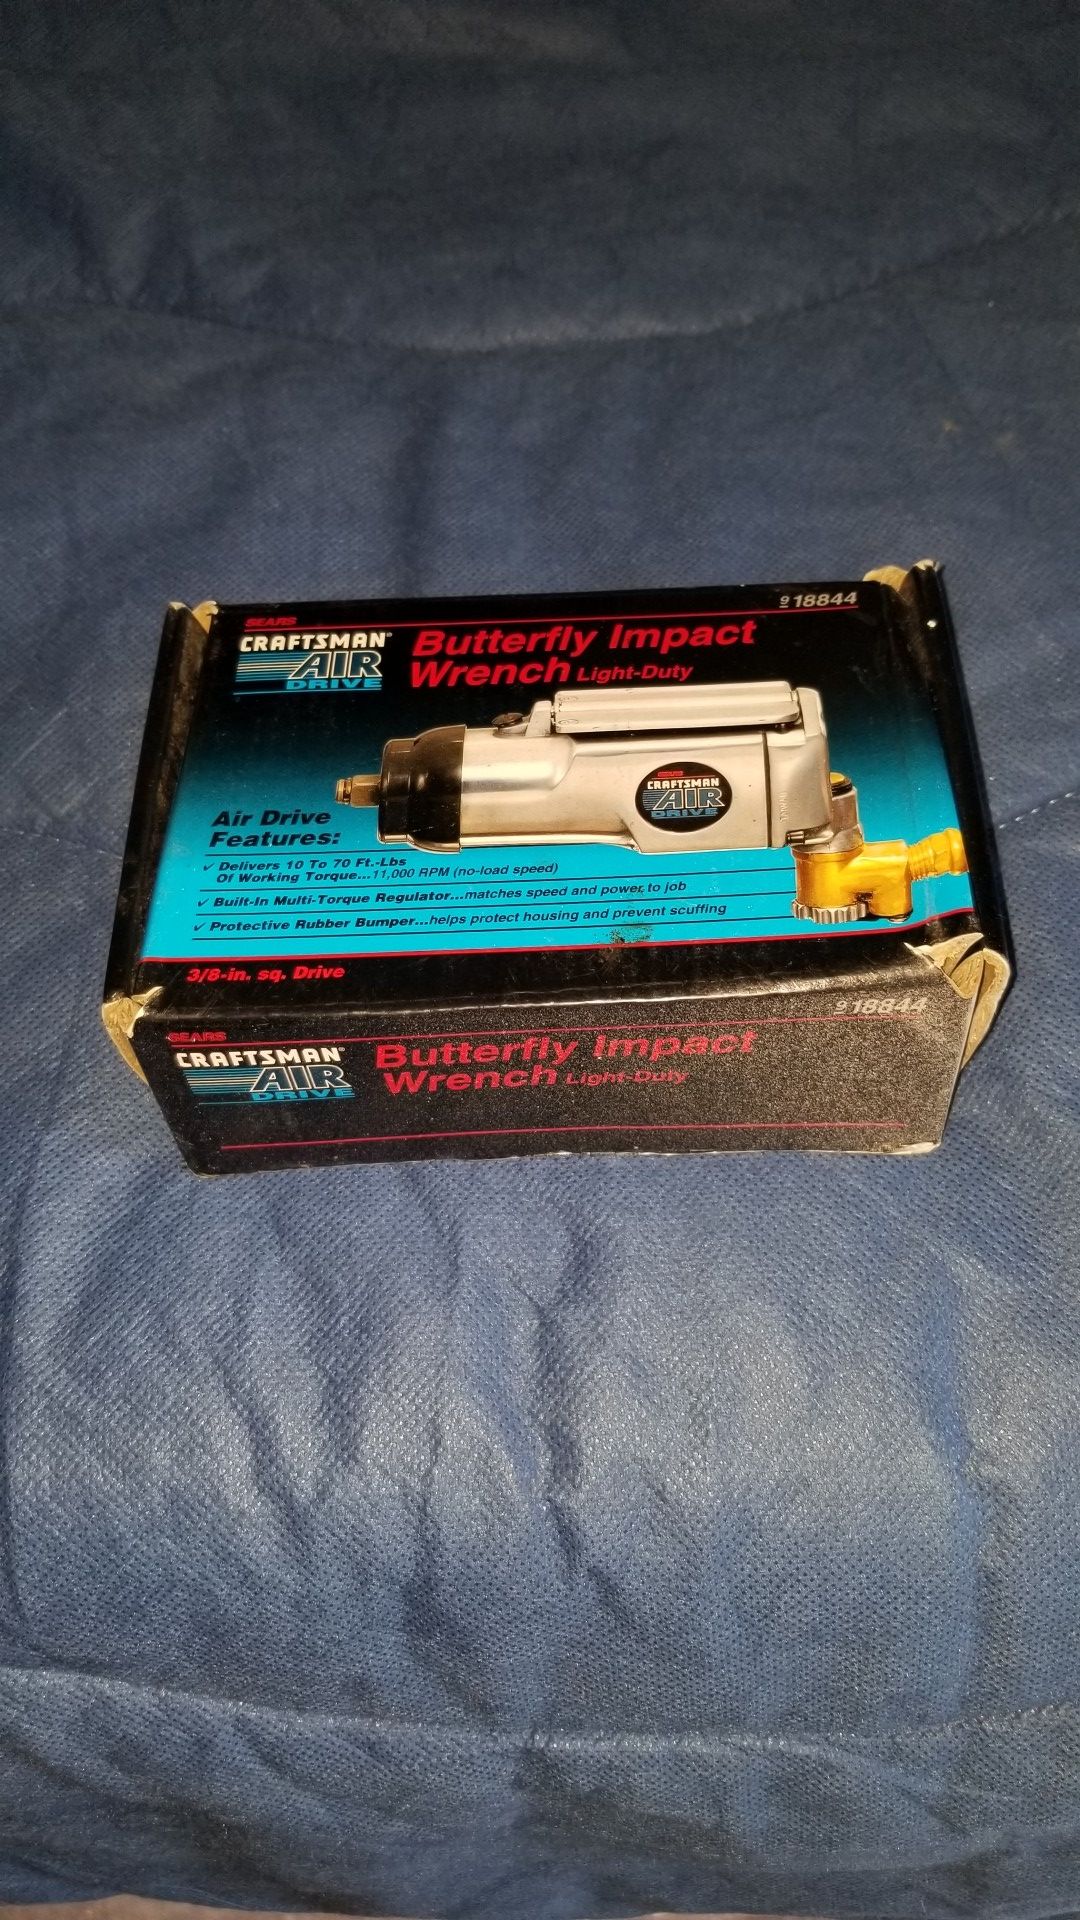 Craftsman butterfly impact wrench